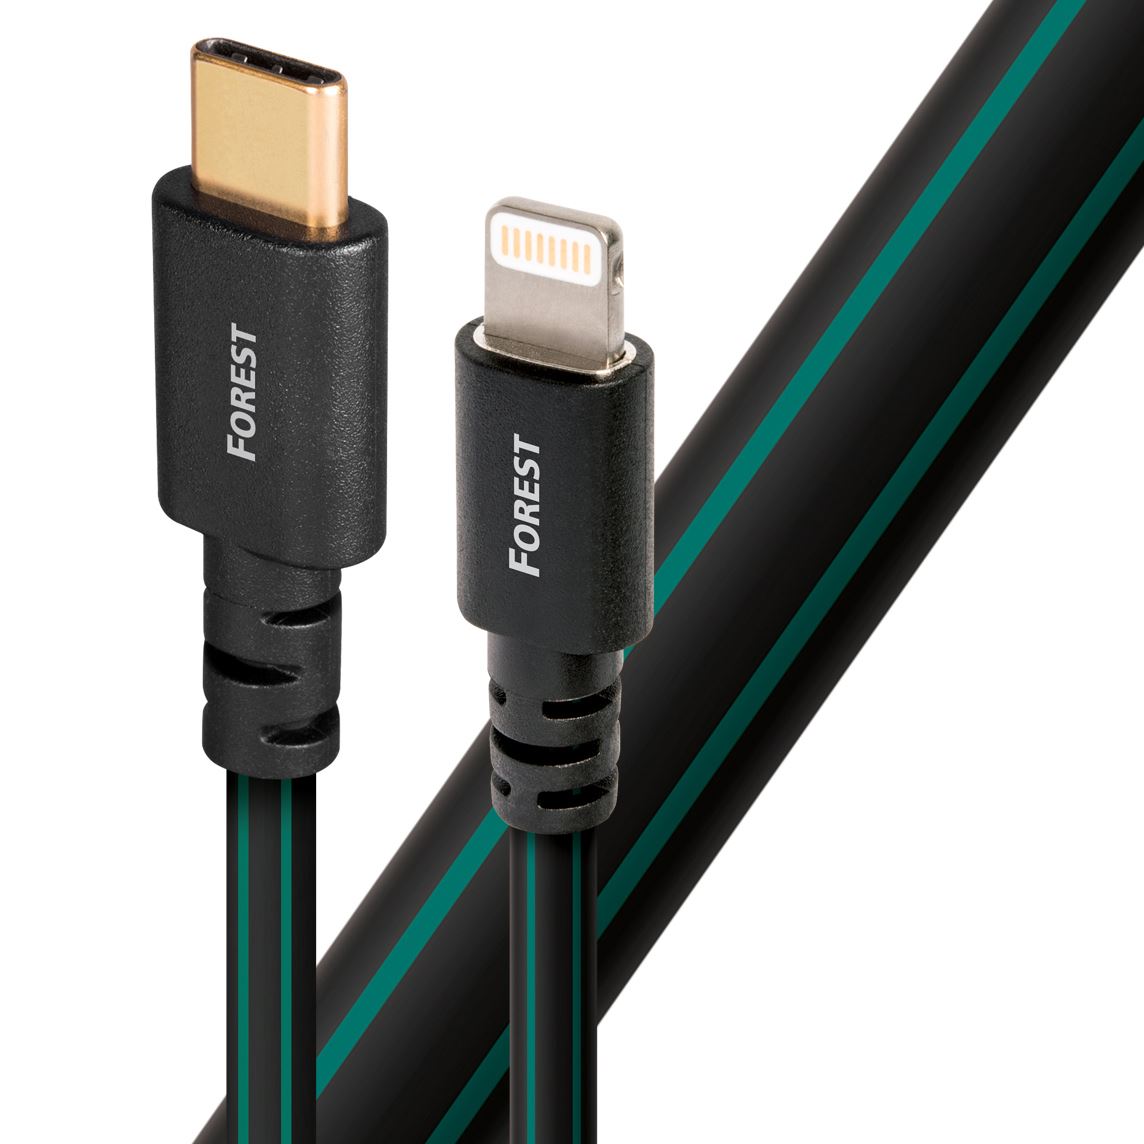 AUDIOQUEST_Forest_1.5M_lightning_to_USB2C._O.5%_silver._Hard-cell_foam._Metal-layer_noise_dissipation_Jacket_-_black_PVC_with_green_stripes._1.5M_FOREST_LIGHTNING-USB_C 1484